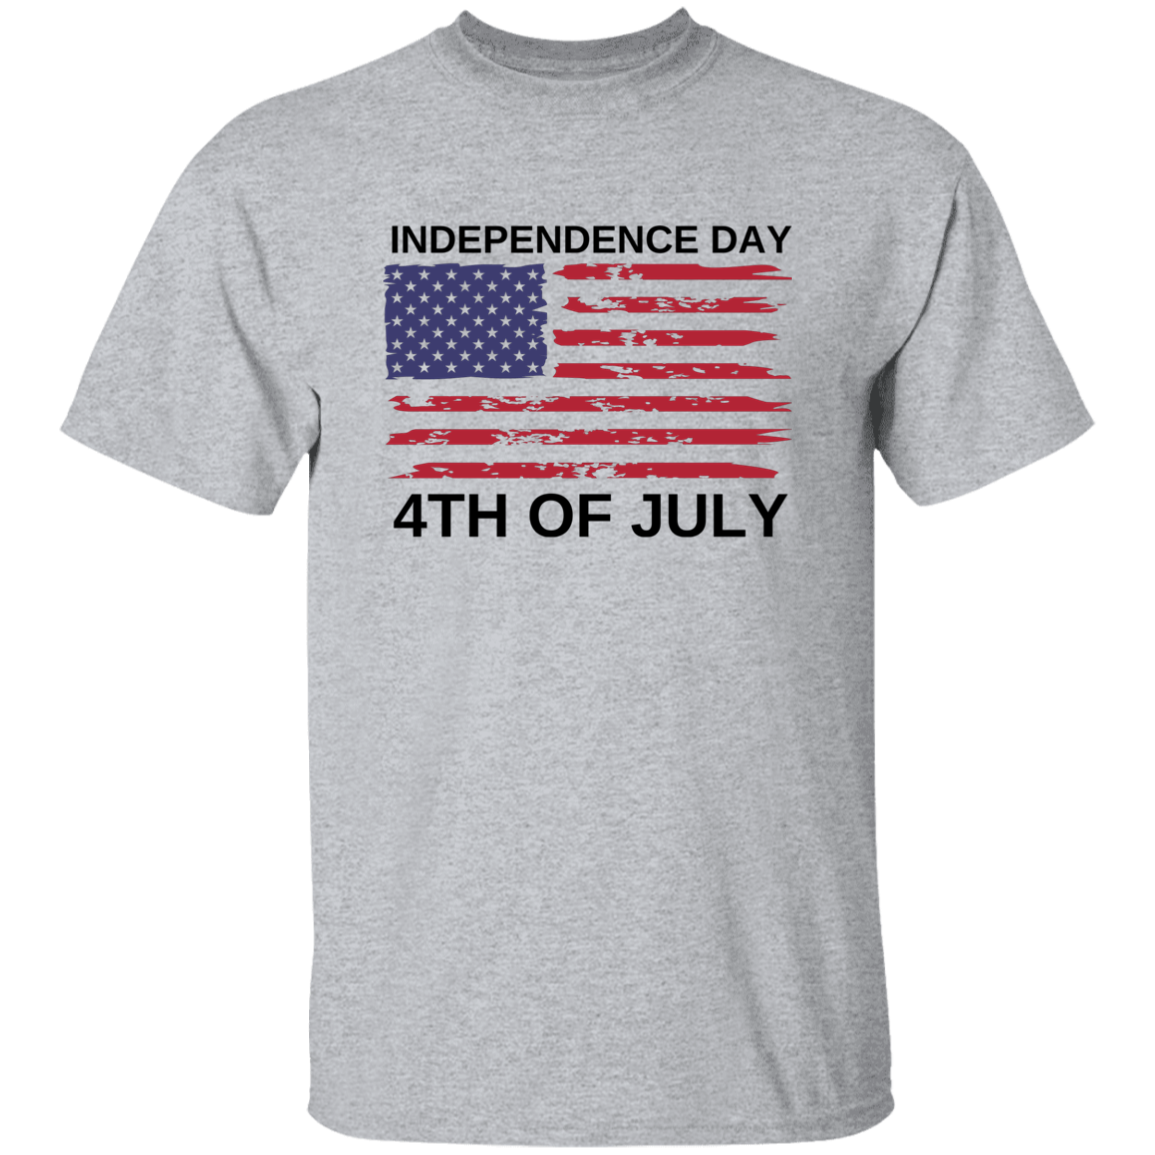 4th of July | T-Shirt | Independence Day_2